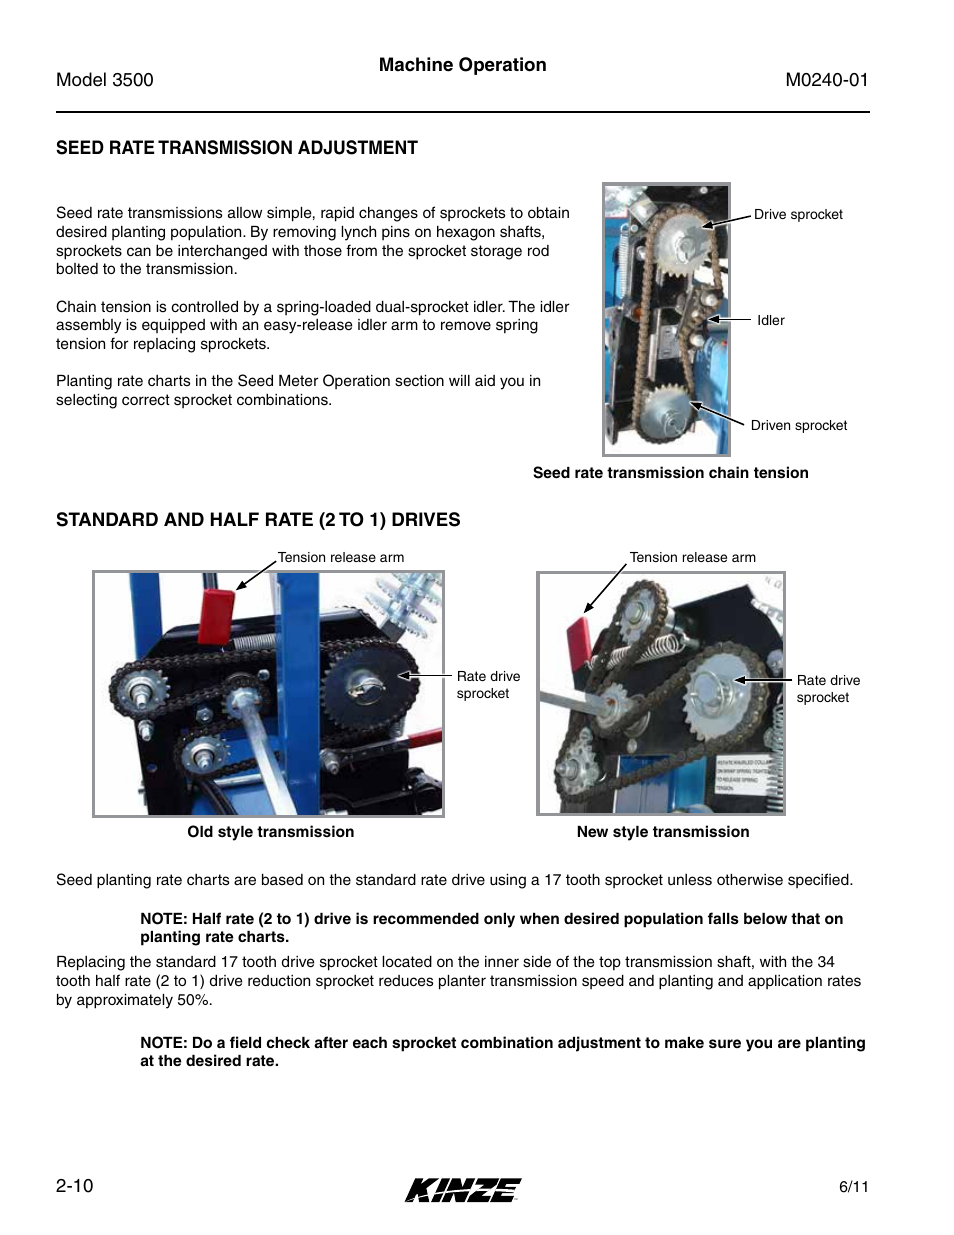 Seed rate transmission adjustment, Standard and half rate (2 to 1) drives, Seed rate transmission adjustment -10 | Standard and half rate (2 to 1) drives -10 | Kinze 3500 Lift and Rotate Planter Rev. 7/14 User Manual | Page 22 / 140